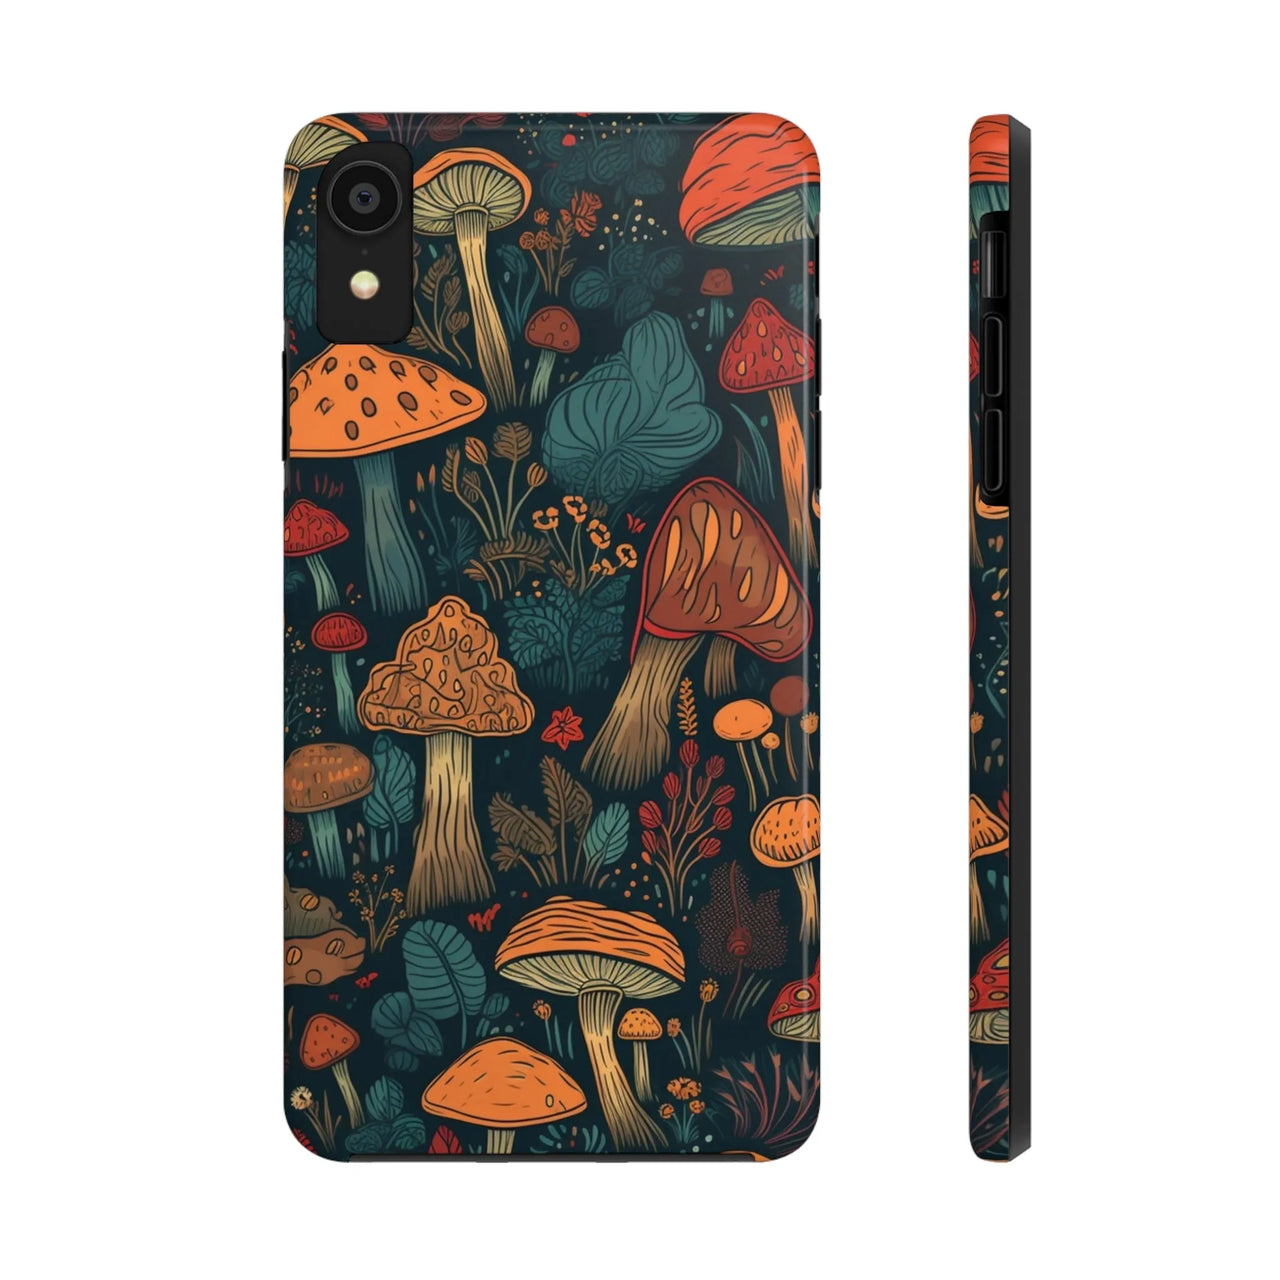 Phone Case: Retro Vintage 70s Aesthetic, Indie Grunge Hippie Groovy Abstract Floral Psychedelic 70's - GroovyGallery